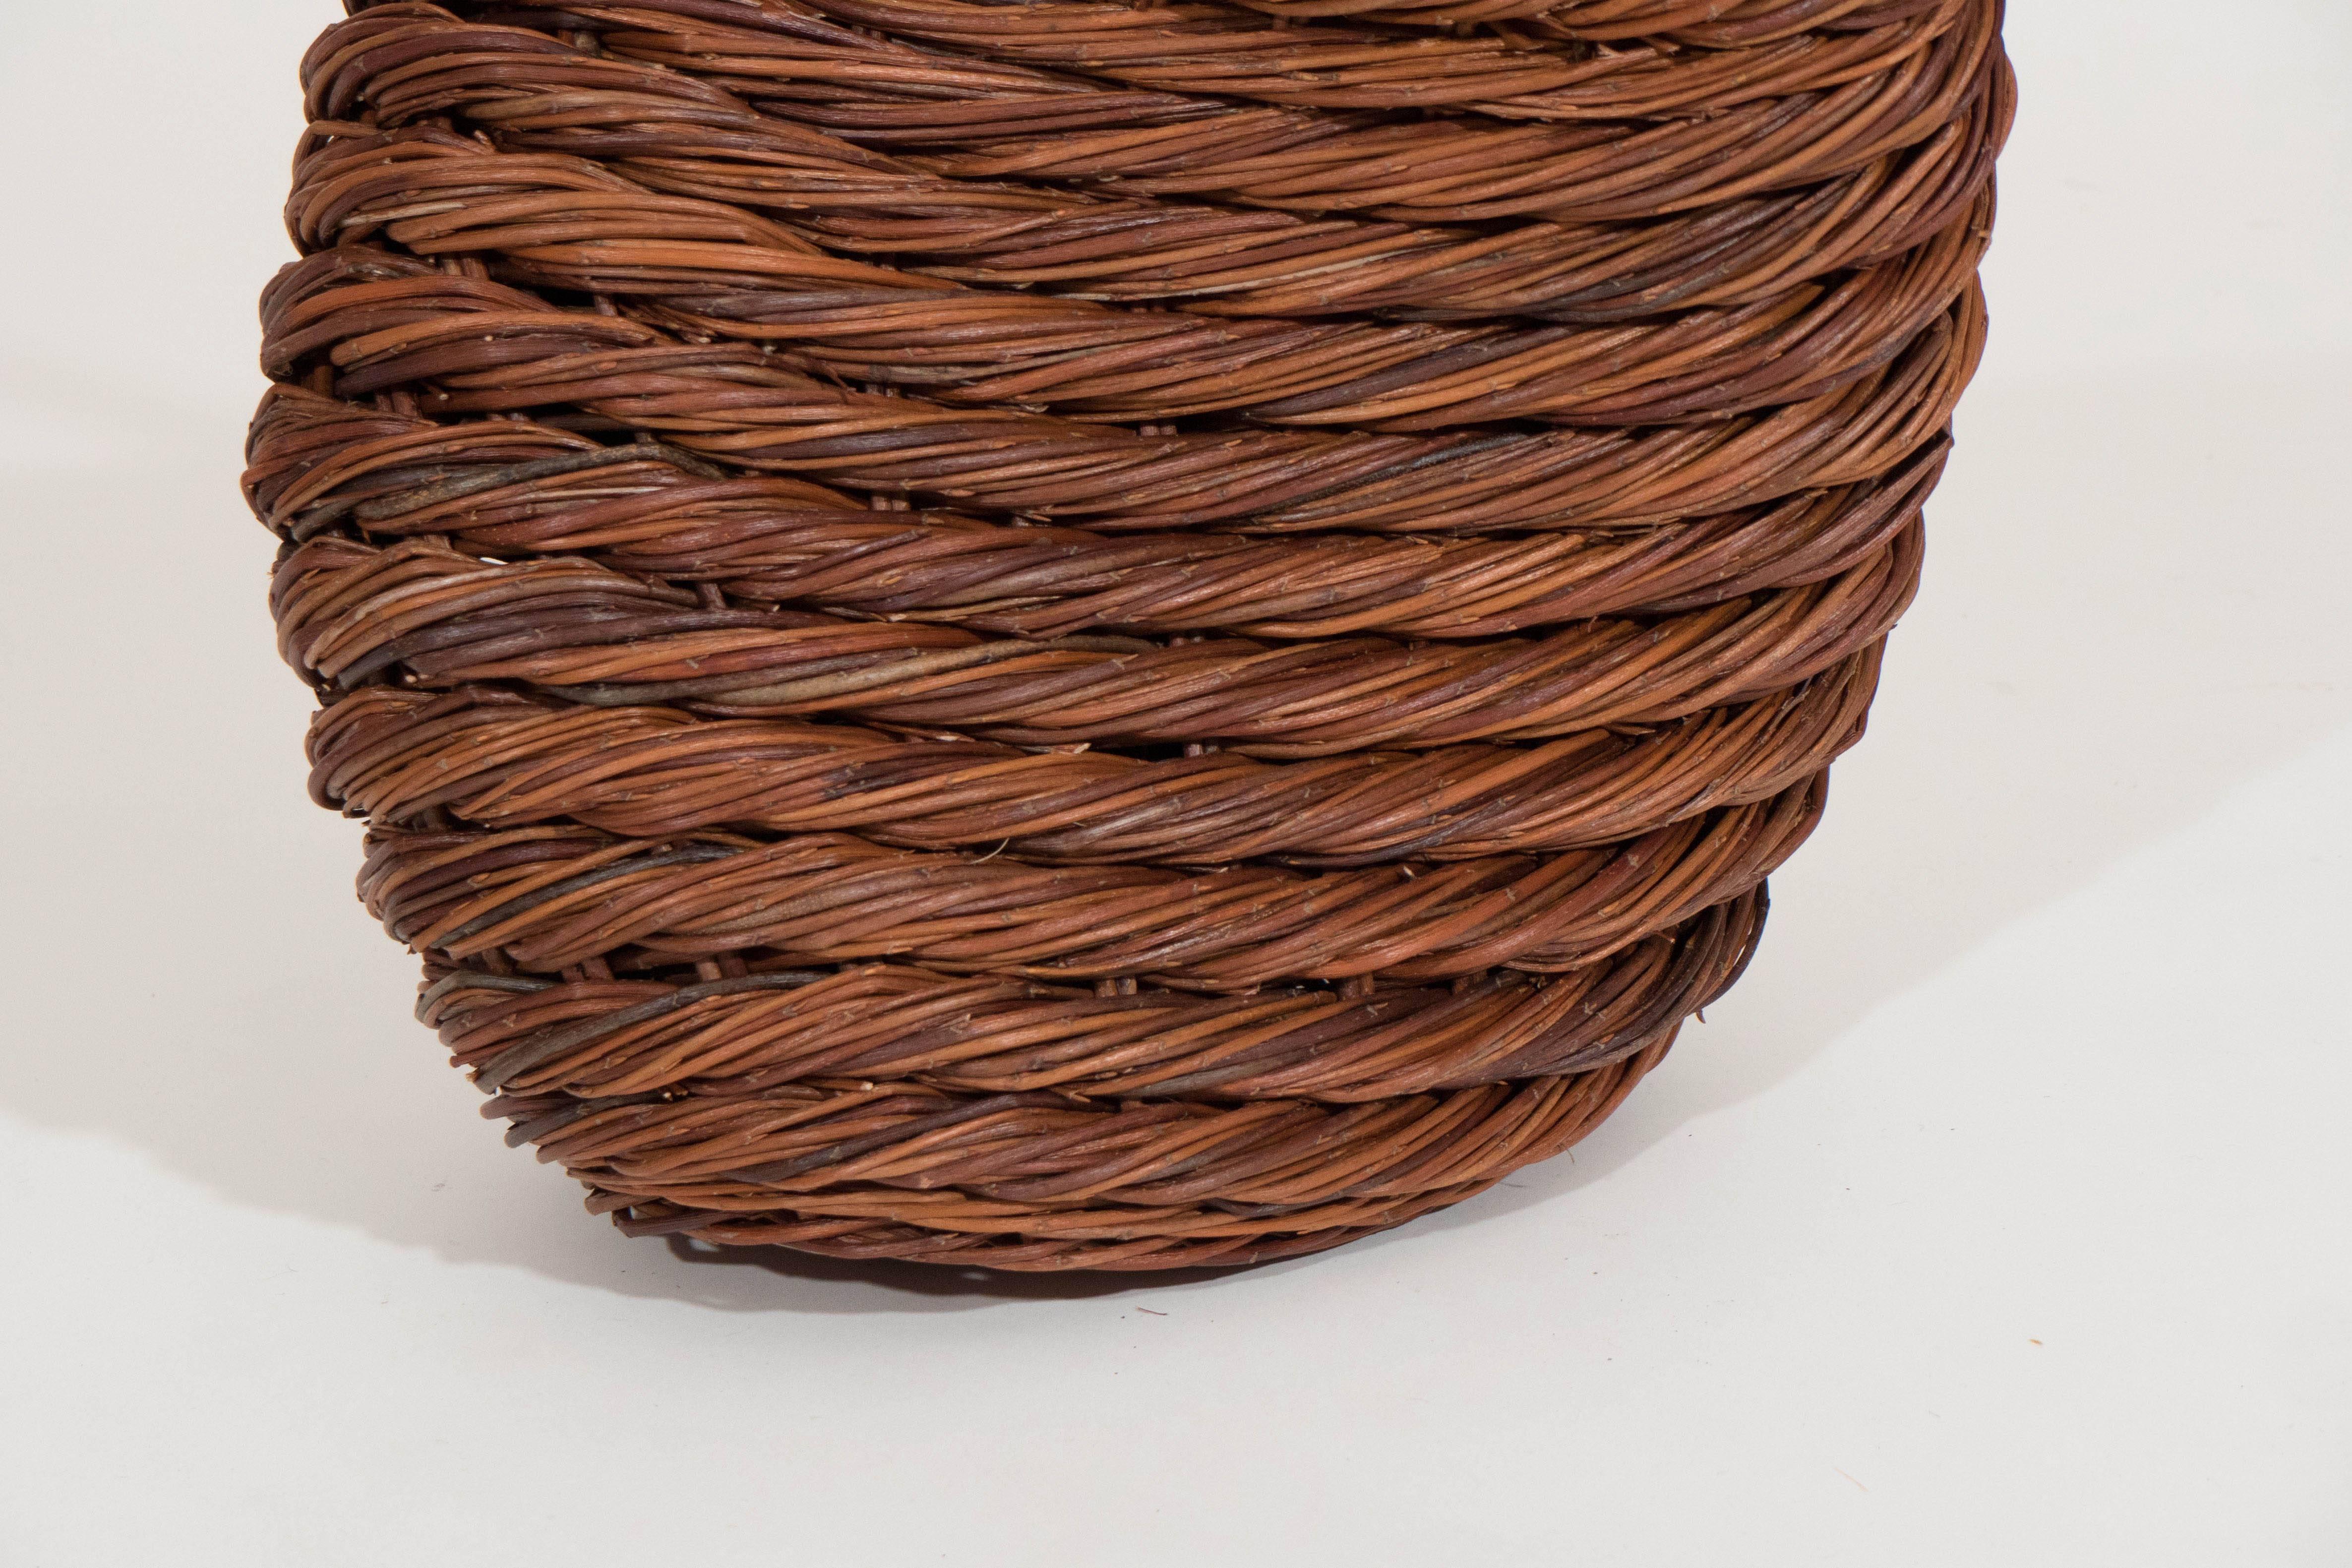 Trained as a basket maker in Erkner, Germany during the 1980s, Klaus Titze combines technology and artisanal tradition with his basket forms. Organically shaped wicker forms are made using a special twisting technique.